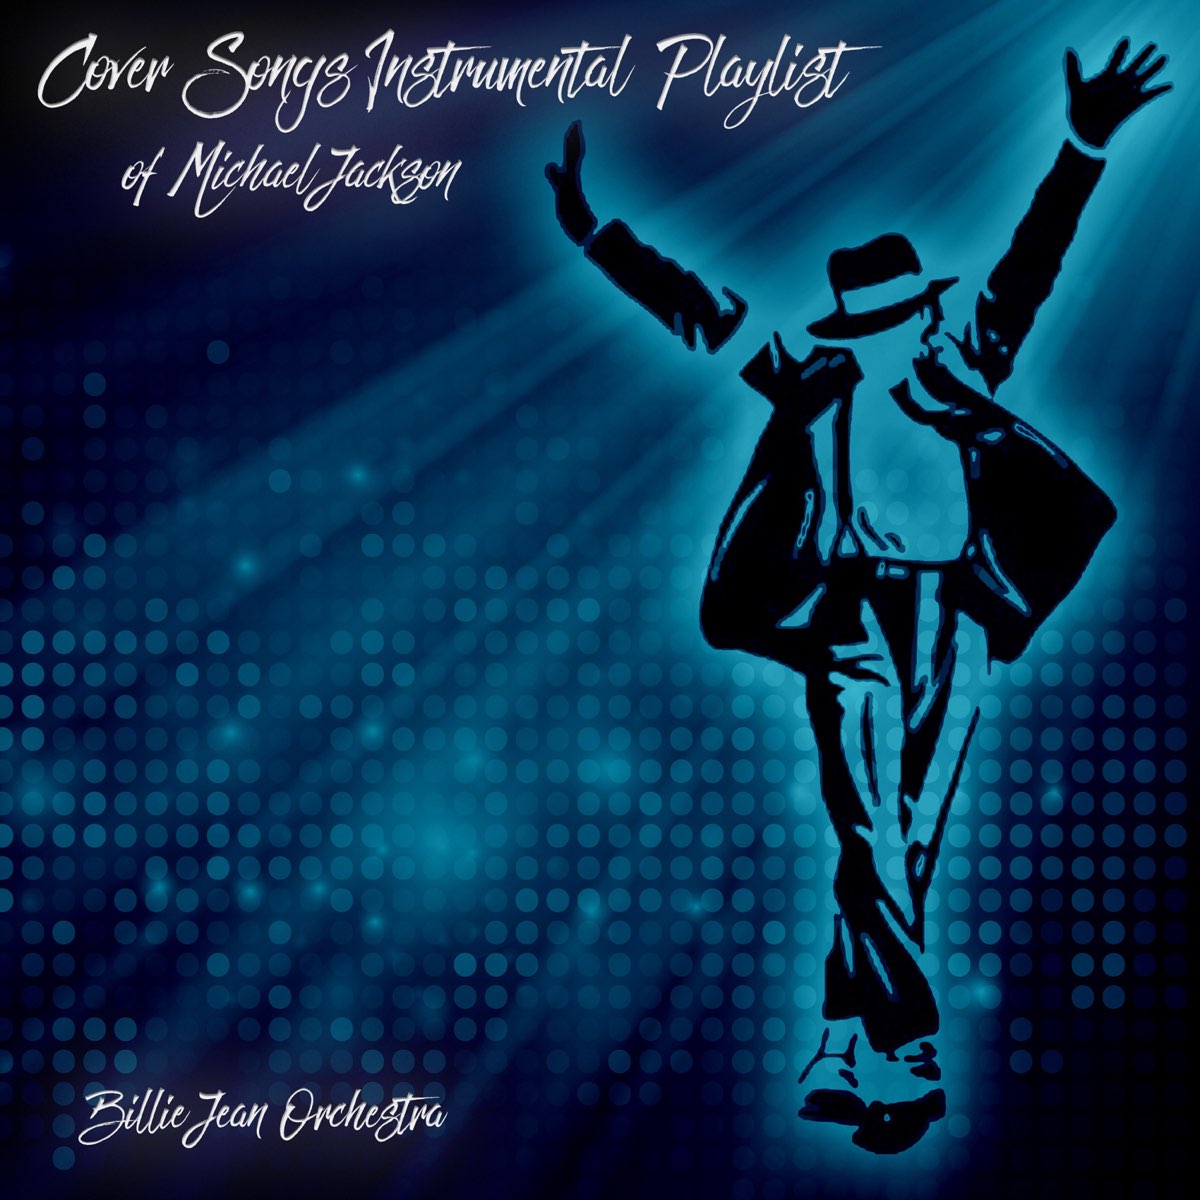 Cover Songs Instrumental Playlist of Michael Jackson by Billie Jean  Orchestra on Apple Music